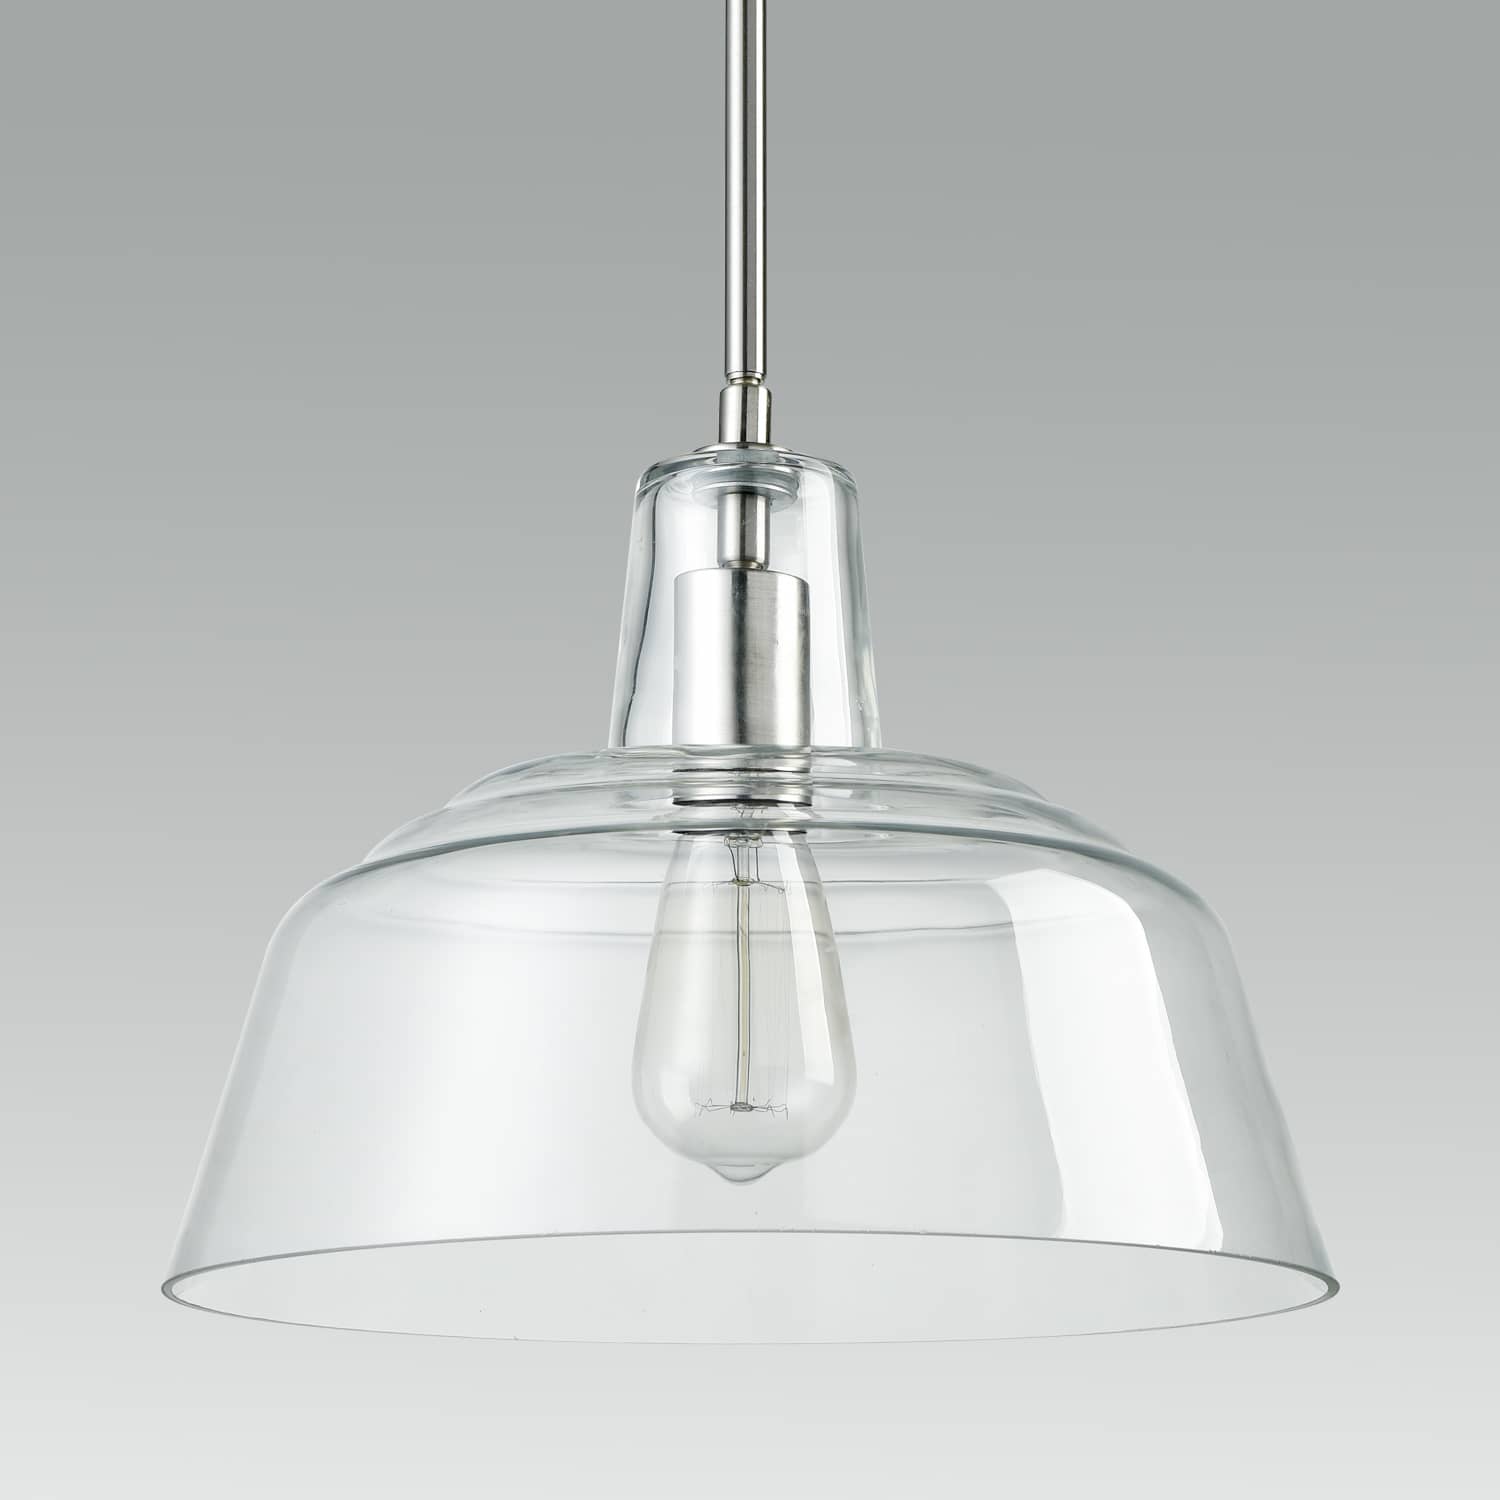 Industrial Pendant Light for Kitchen Island Clear Glass Hanging Light,Brushed Nickel